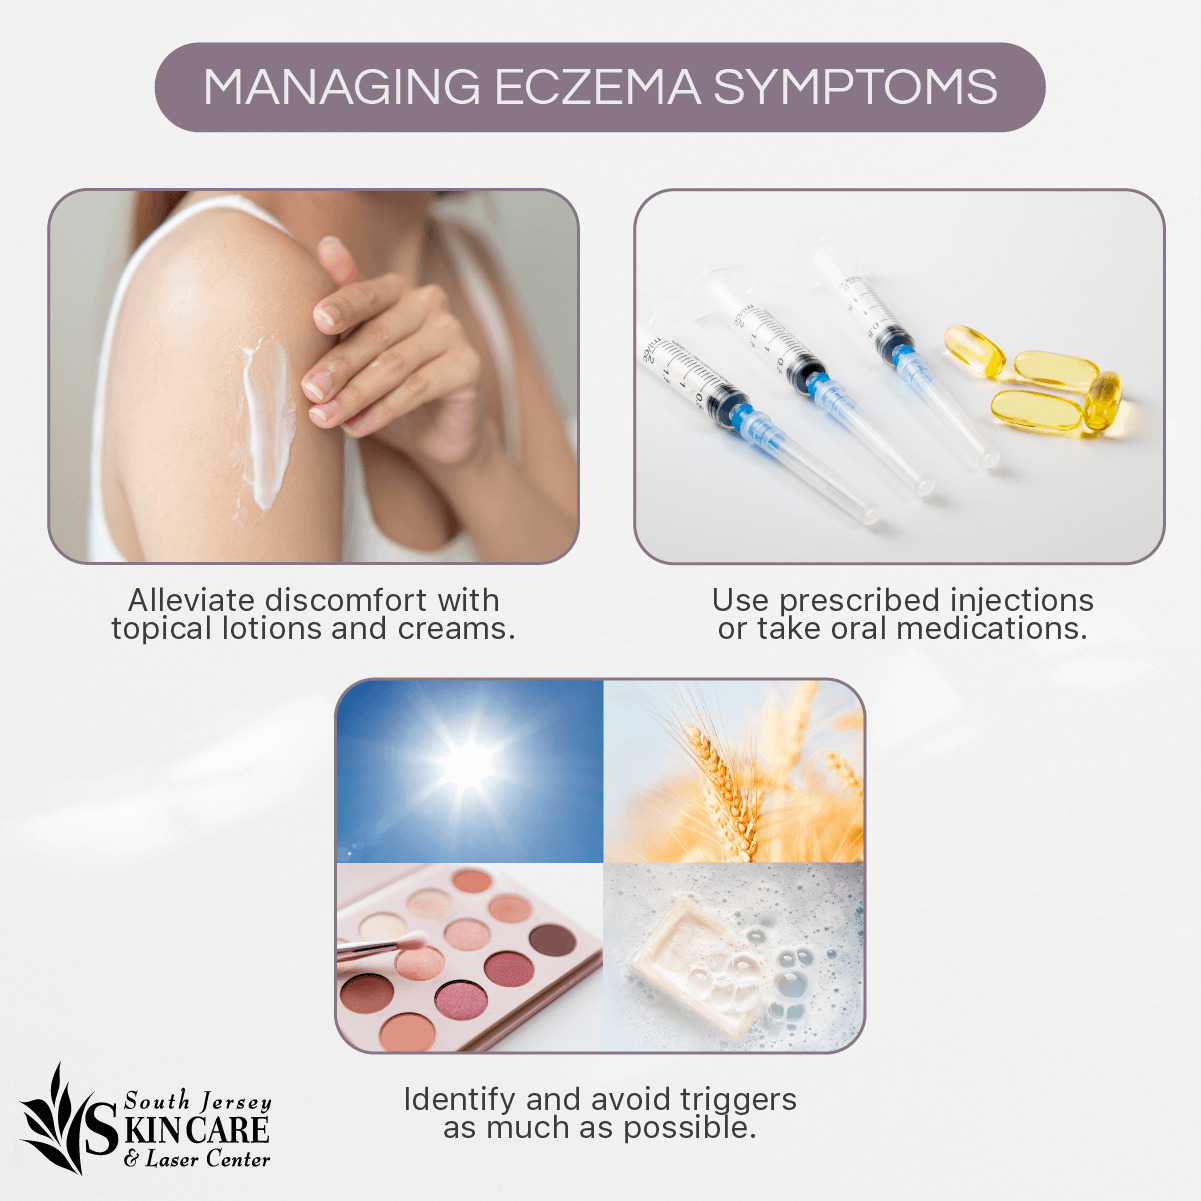 Learn to manage eczema at New Jersey’s South Jersey Skin Care & Laser Center.